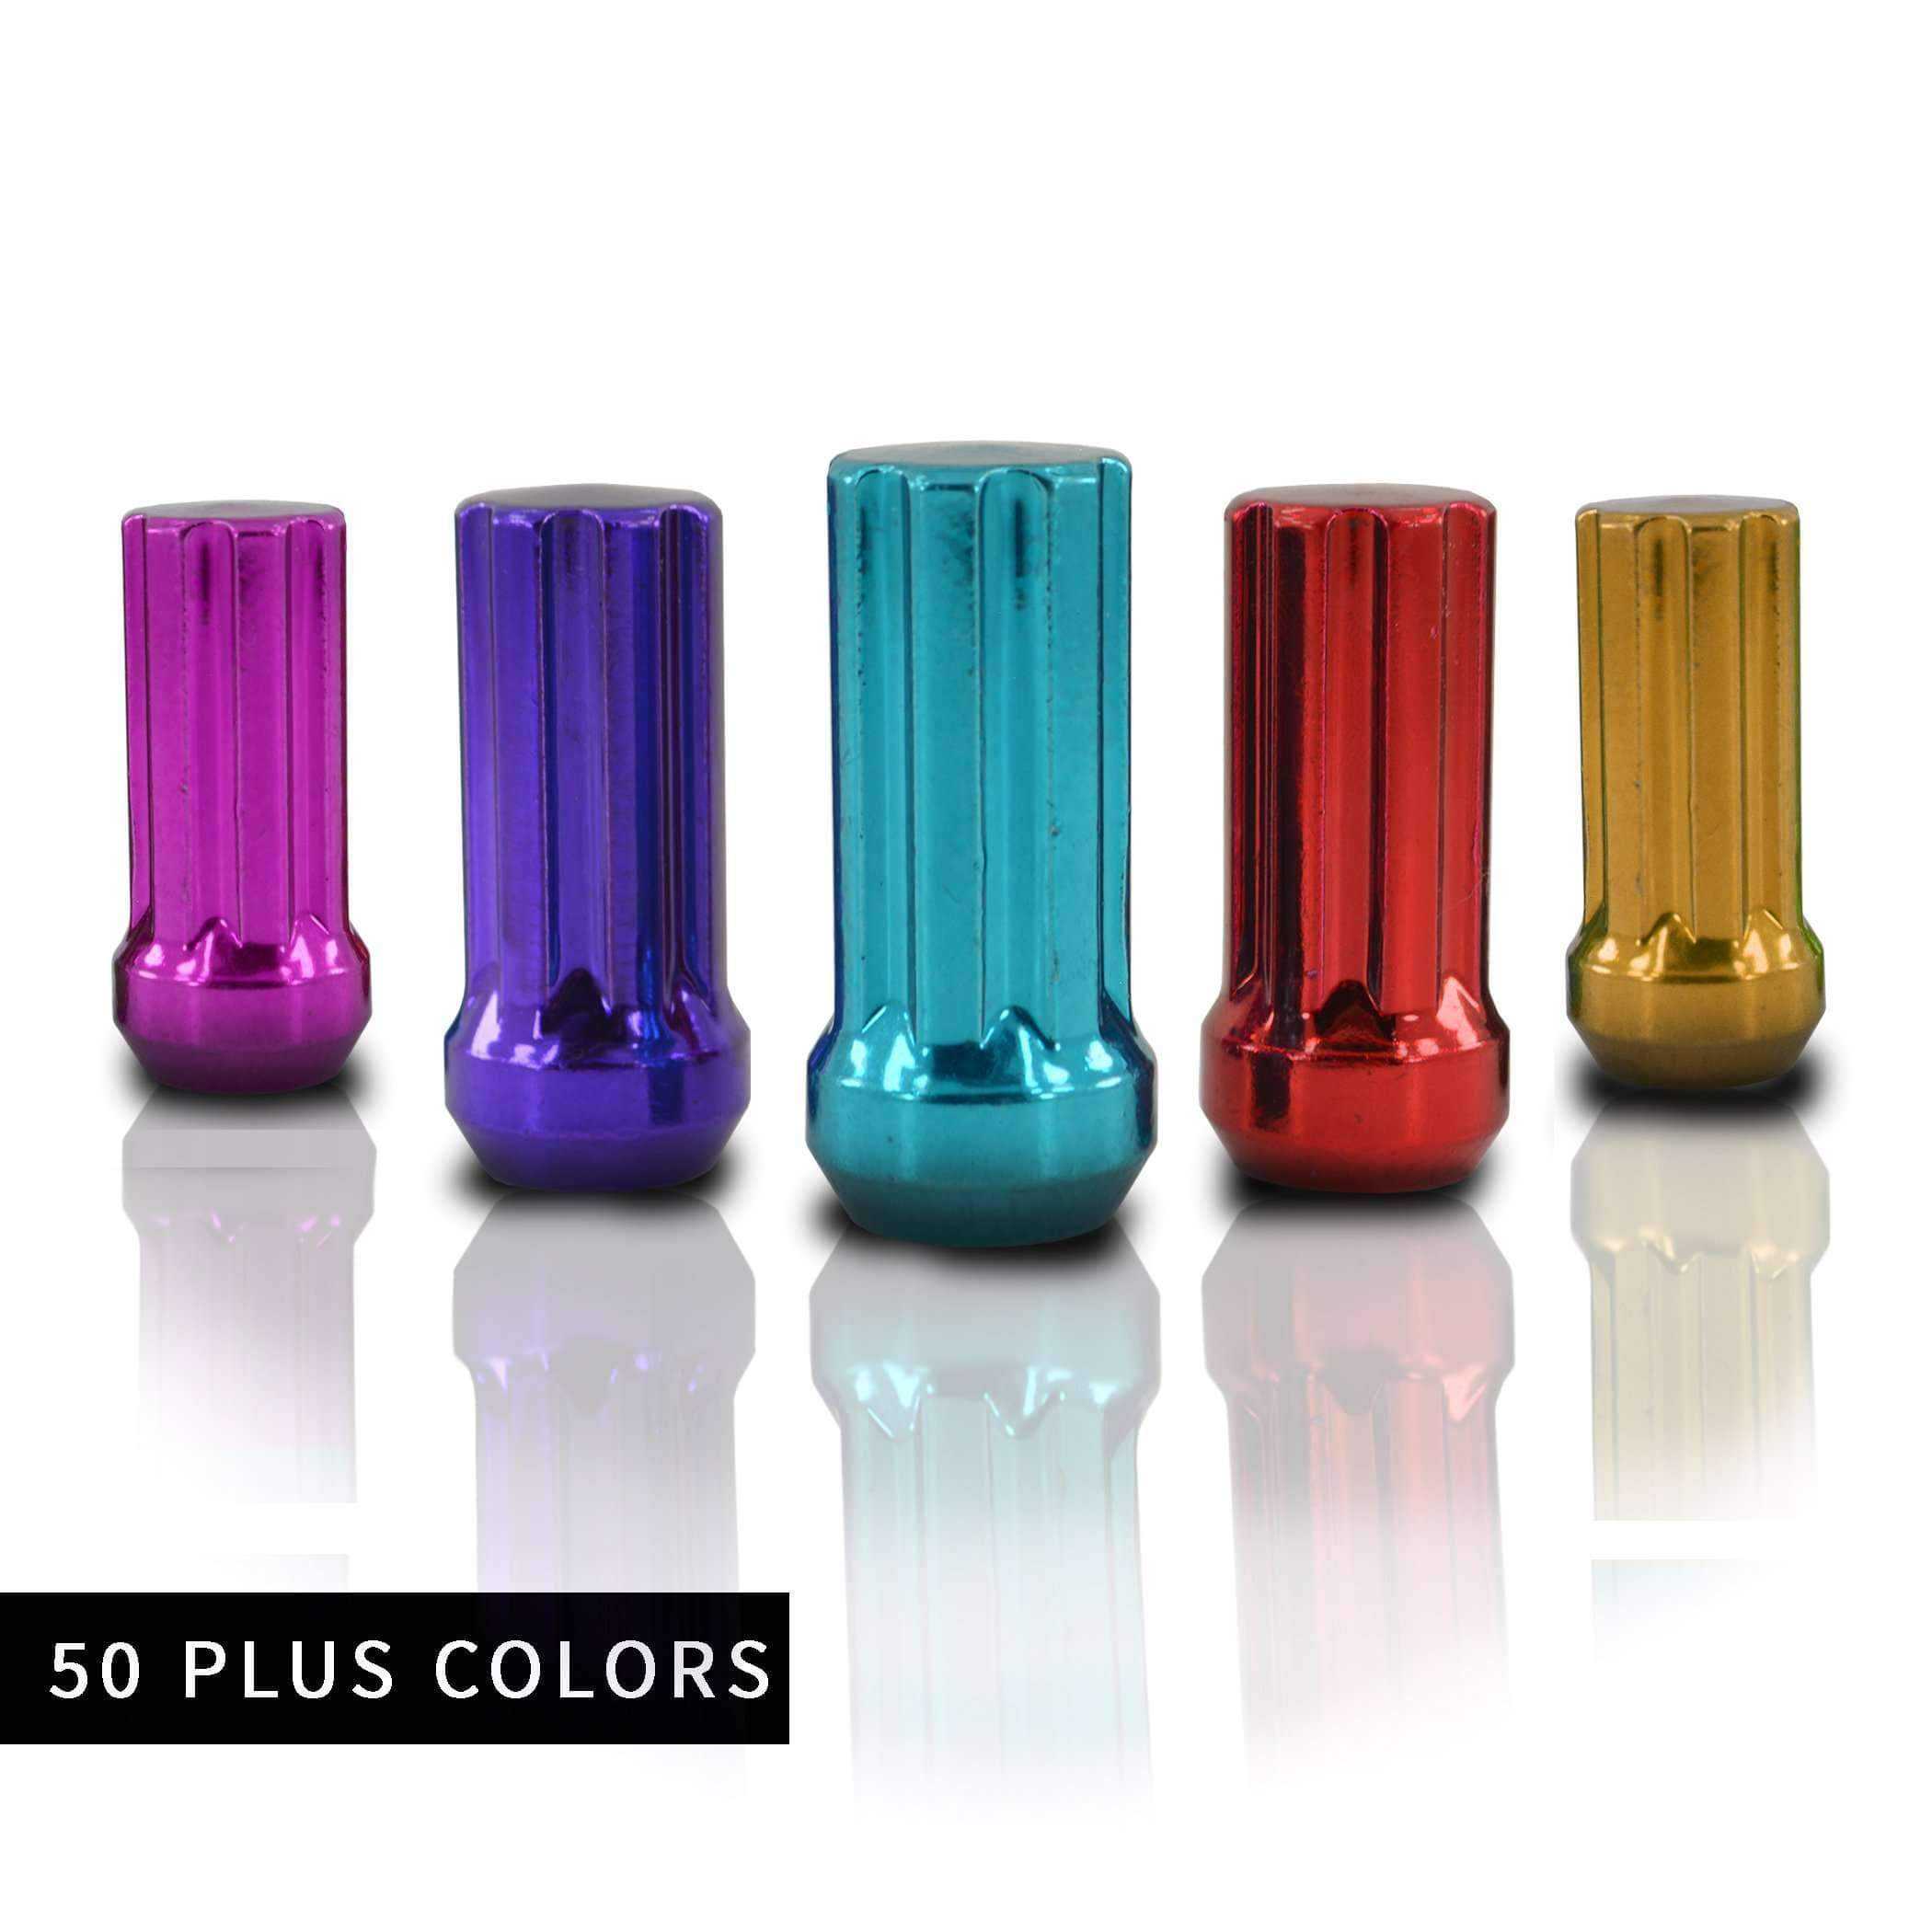 24 pc 1/2-20 main picture 7 Spline Duplex security lug nuts 2" Tall For Aftermarket Wheels powder coated durable coating